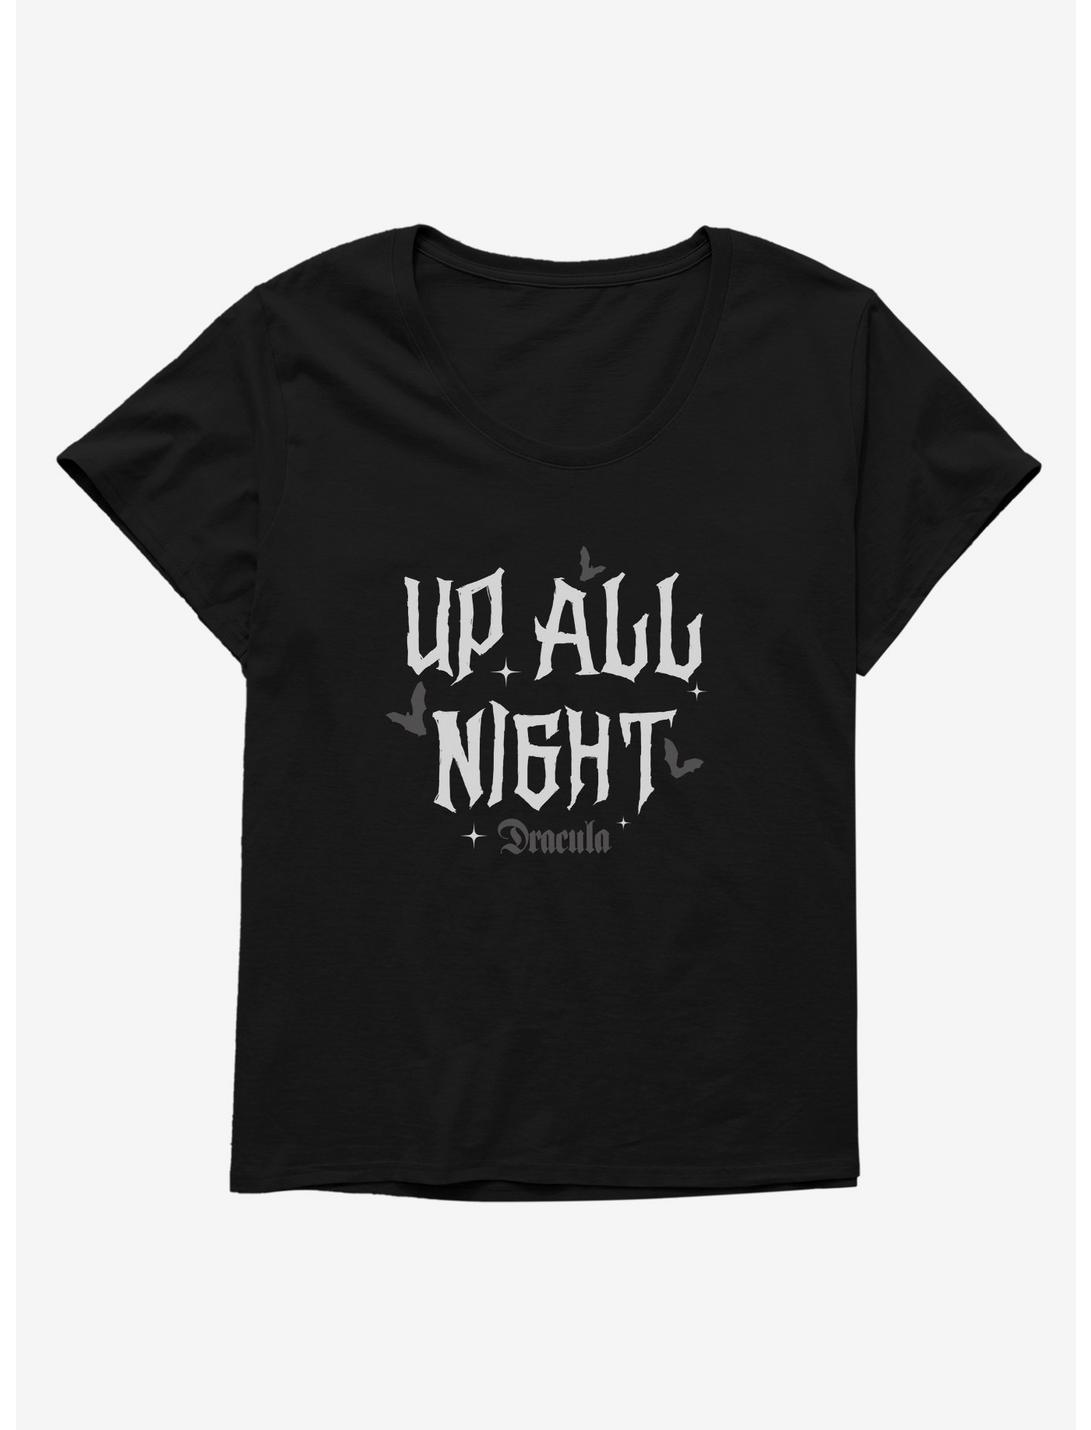 Universal Monsters Dracula Up All Night Womens T-Shirt Plus Size, BLACK, hi-res